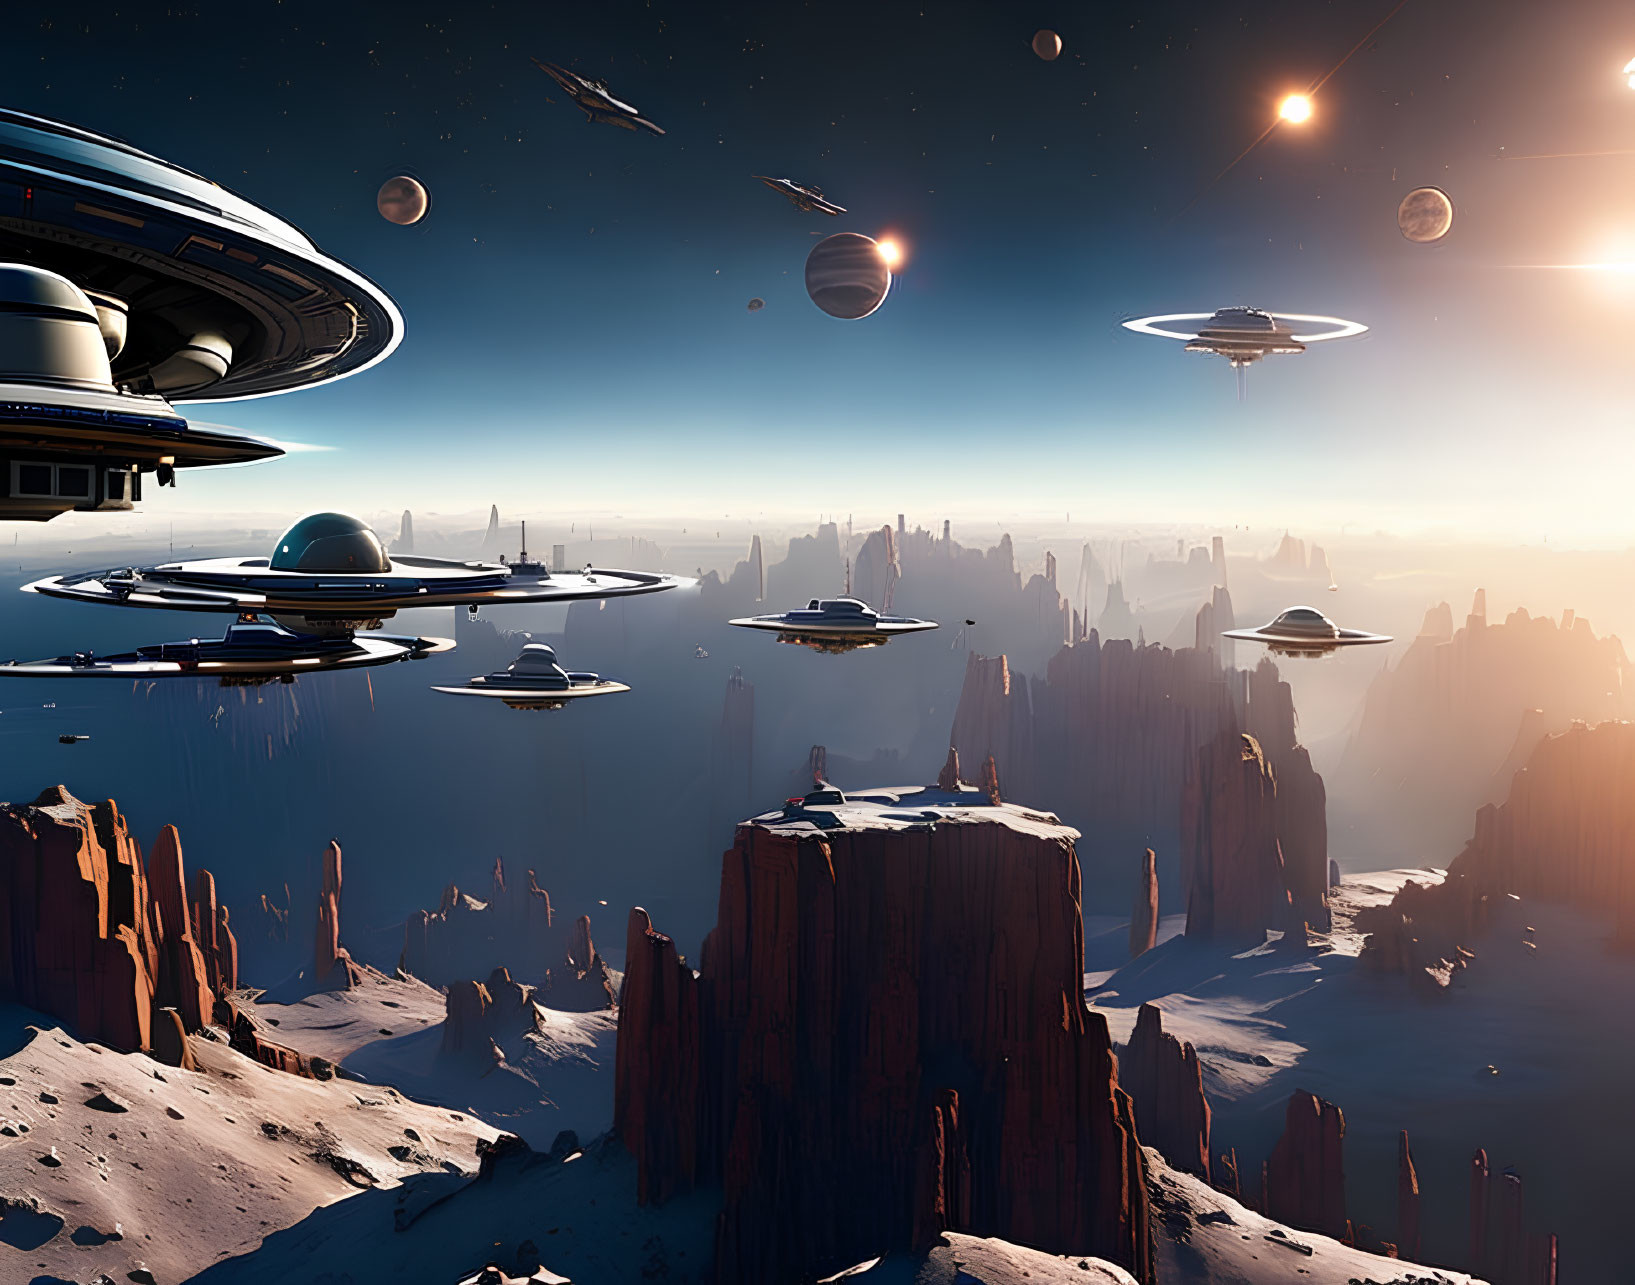 Futuristic cityscape with flying saucers above rocky outcrops and distant planets.